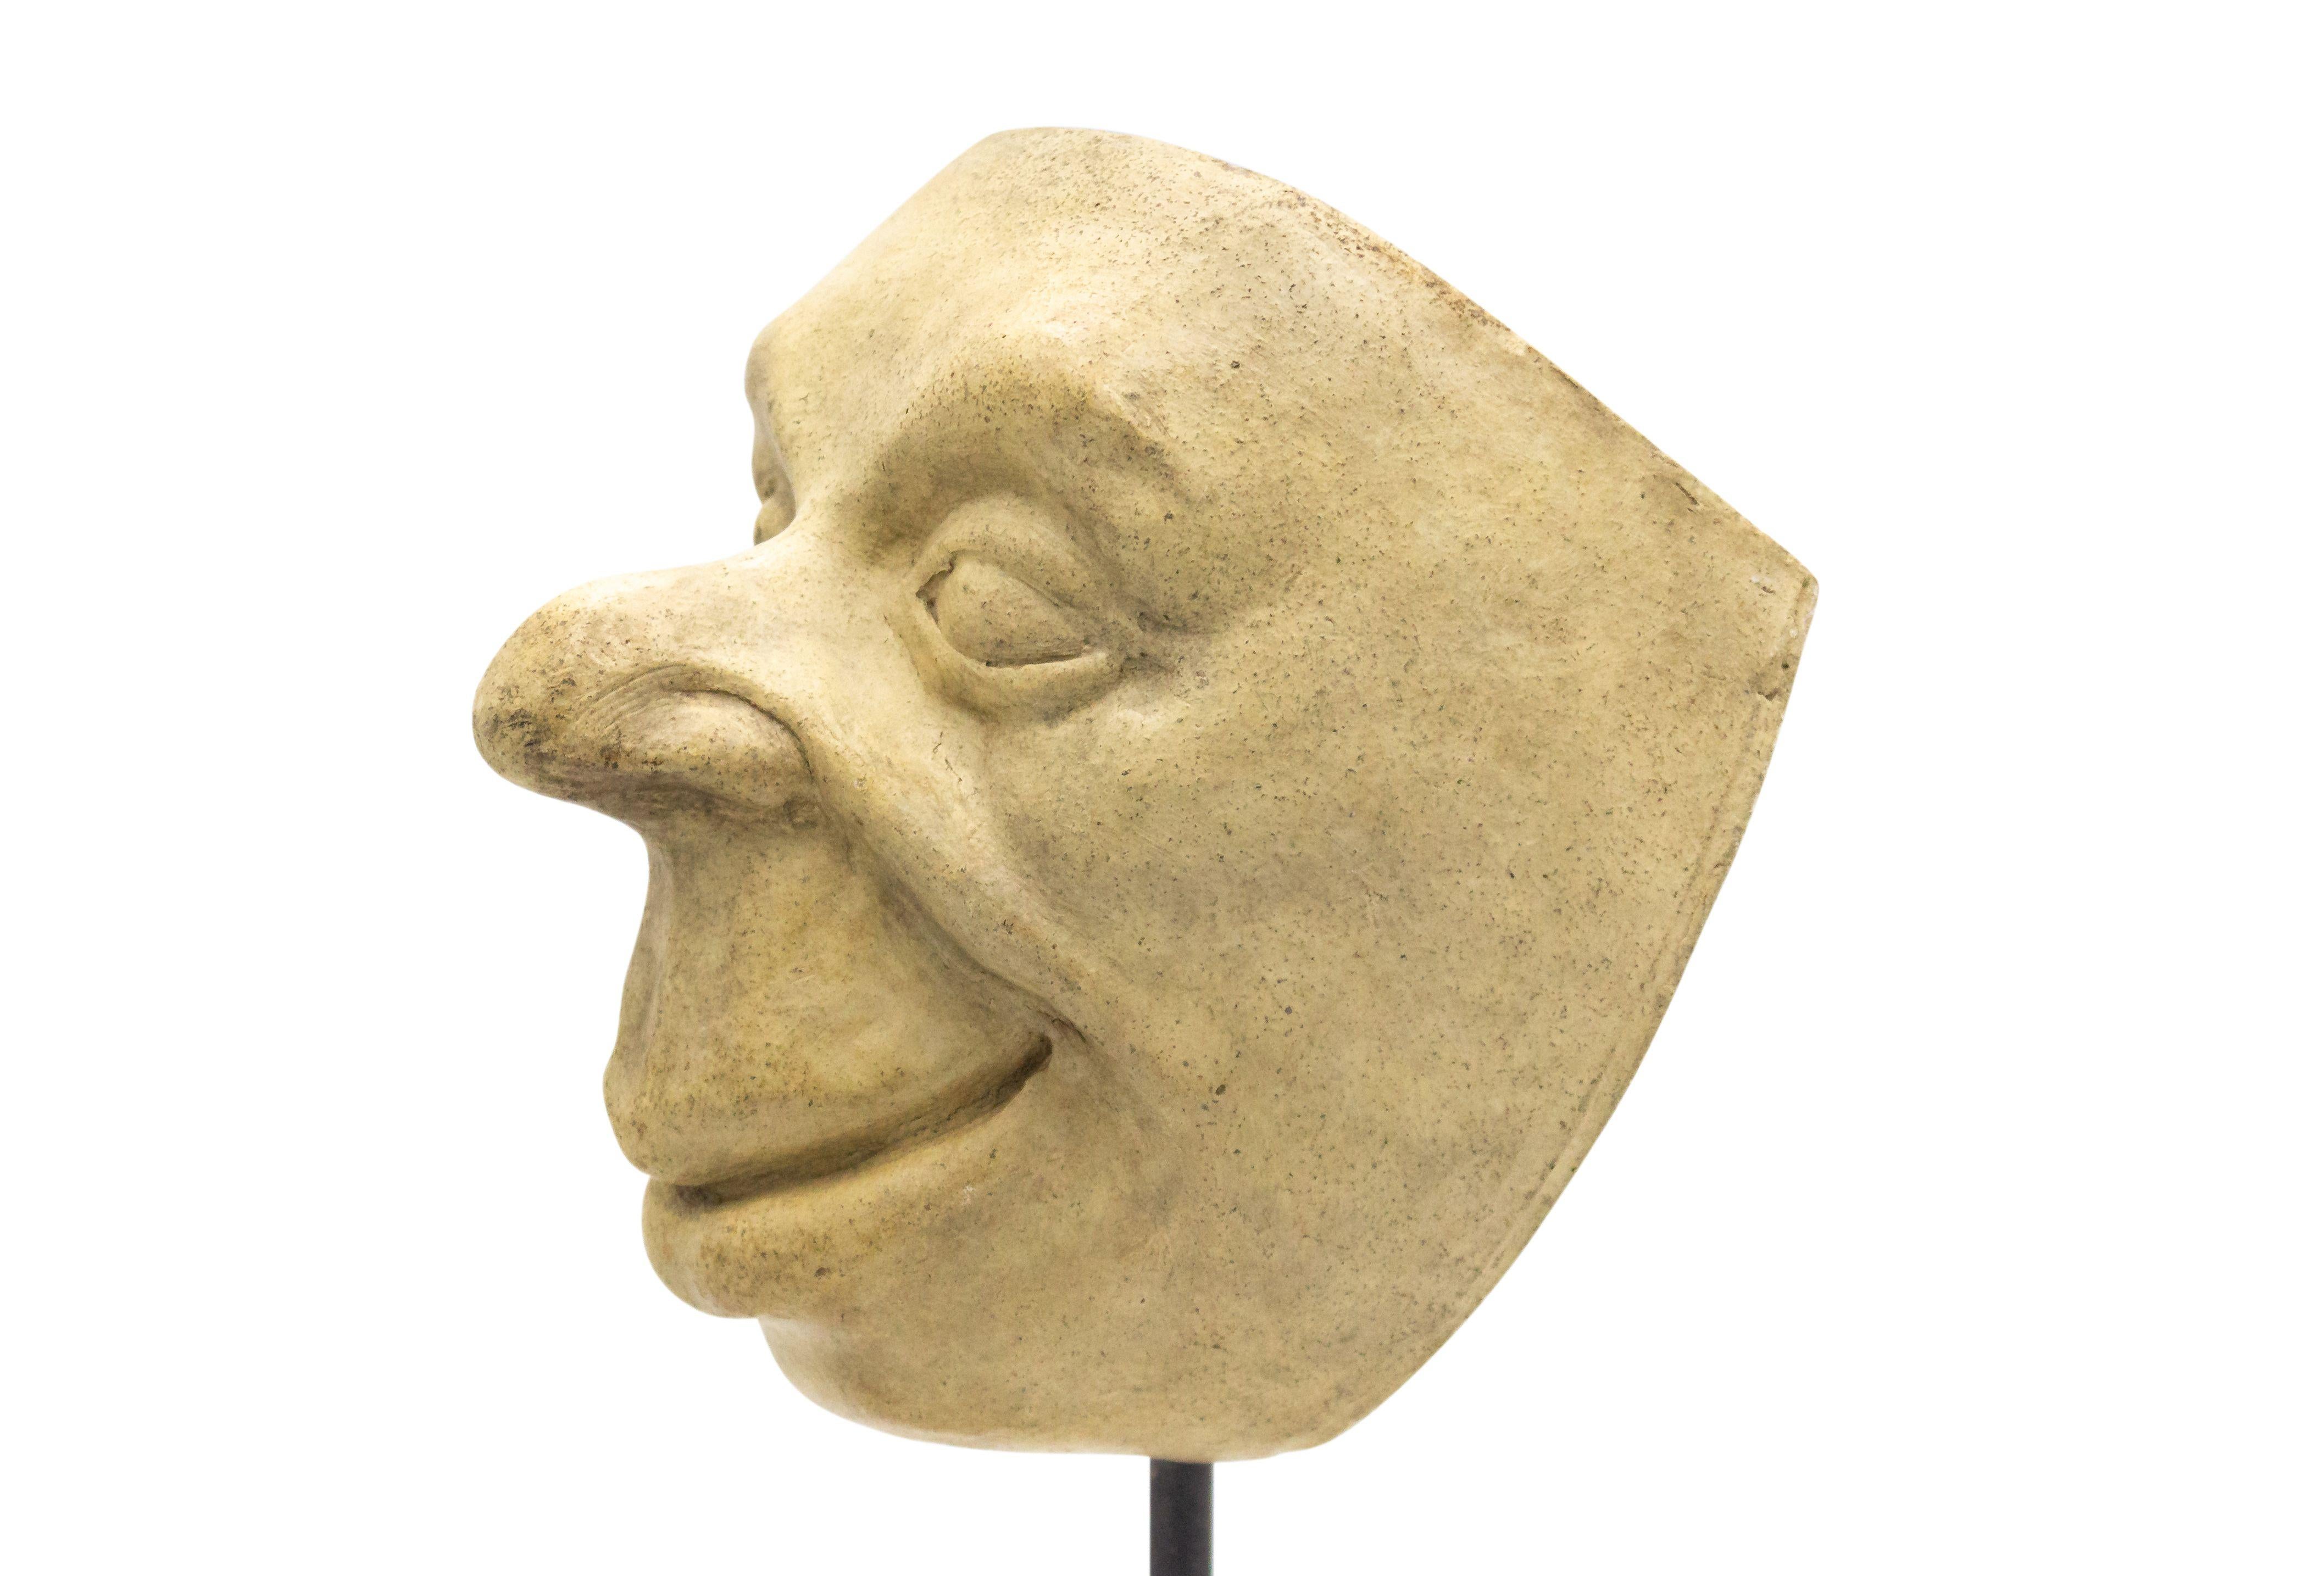 Continental German (late 19th Cent) sculpted terra-cotta master mask mold of a smiling grotesque face with a bulbous nose and lips displayed on a square black marble base stand (part of a 39 piece collection).
 